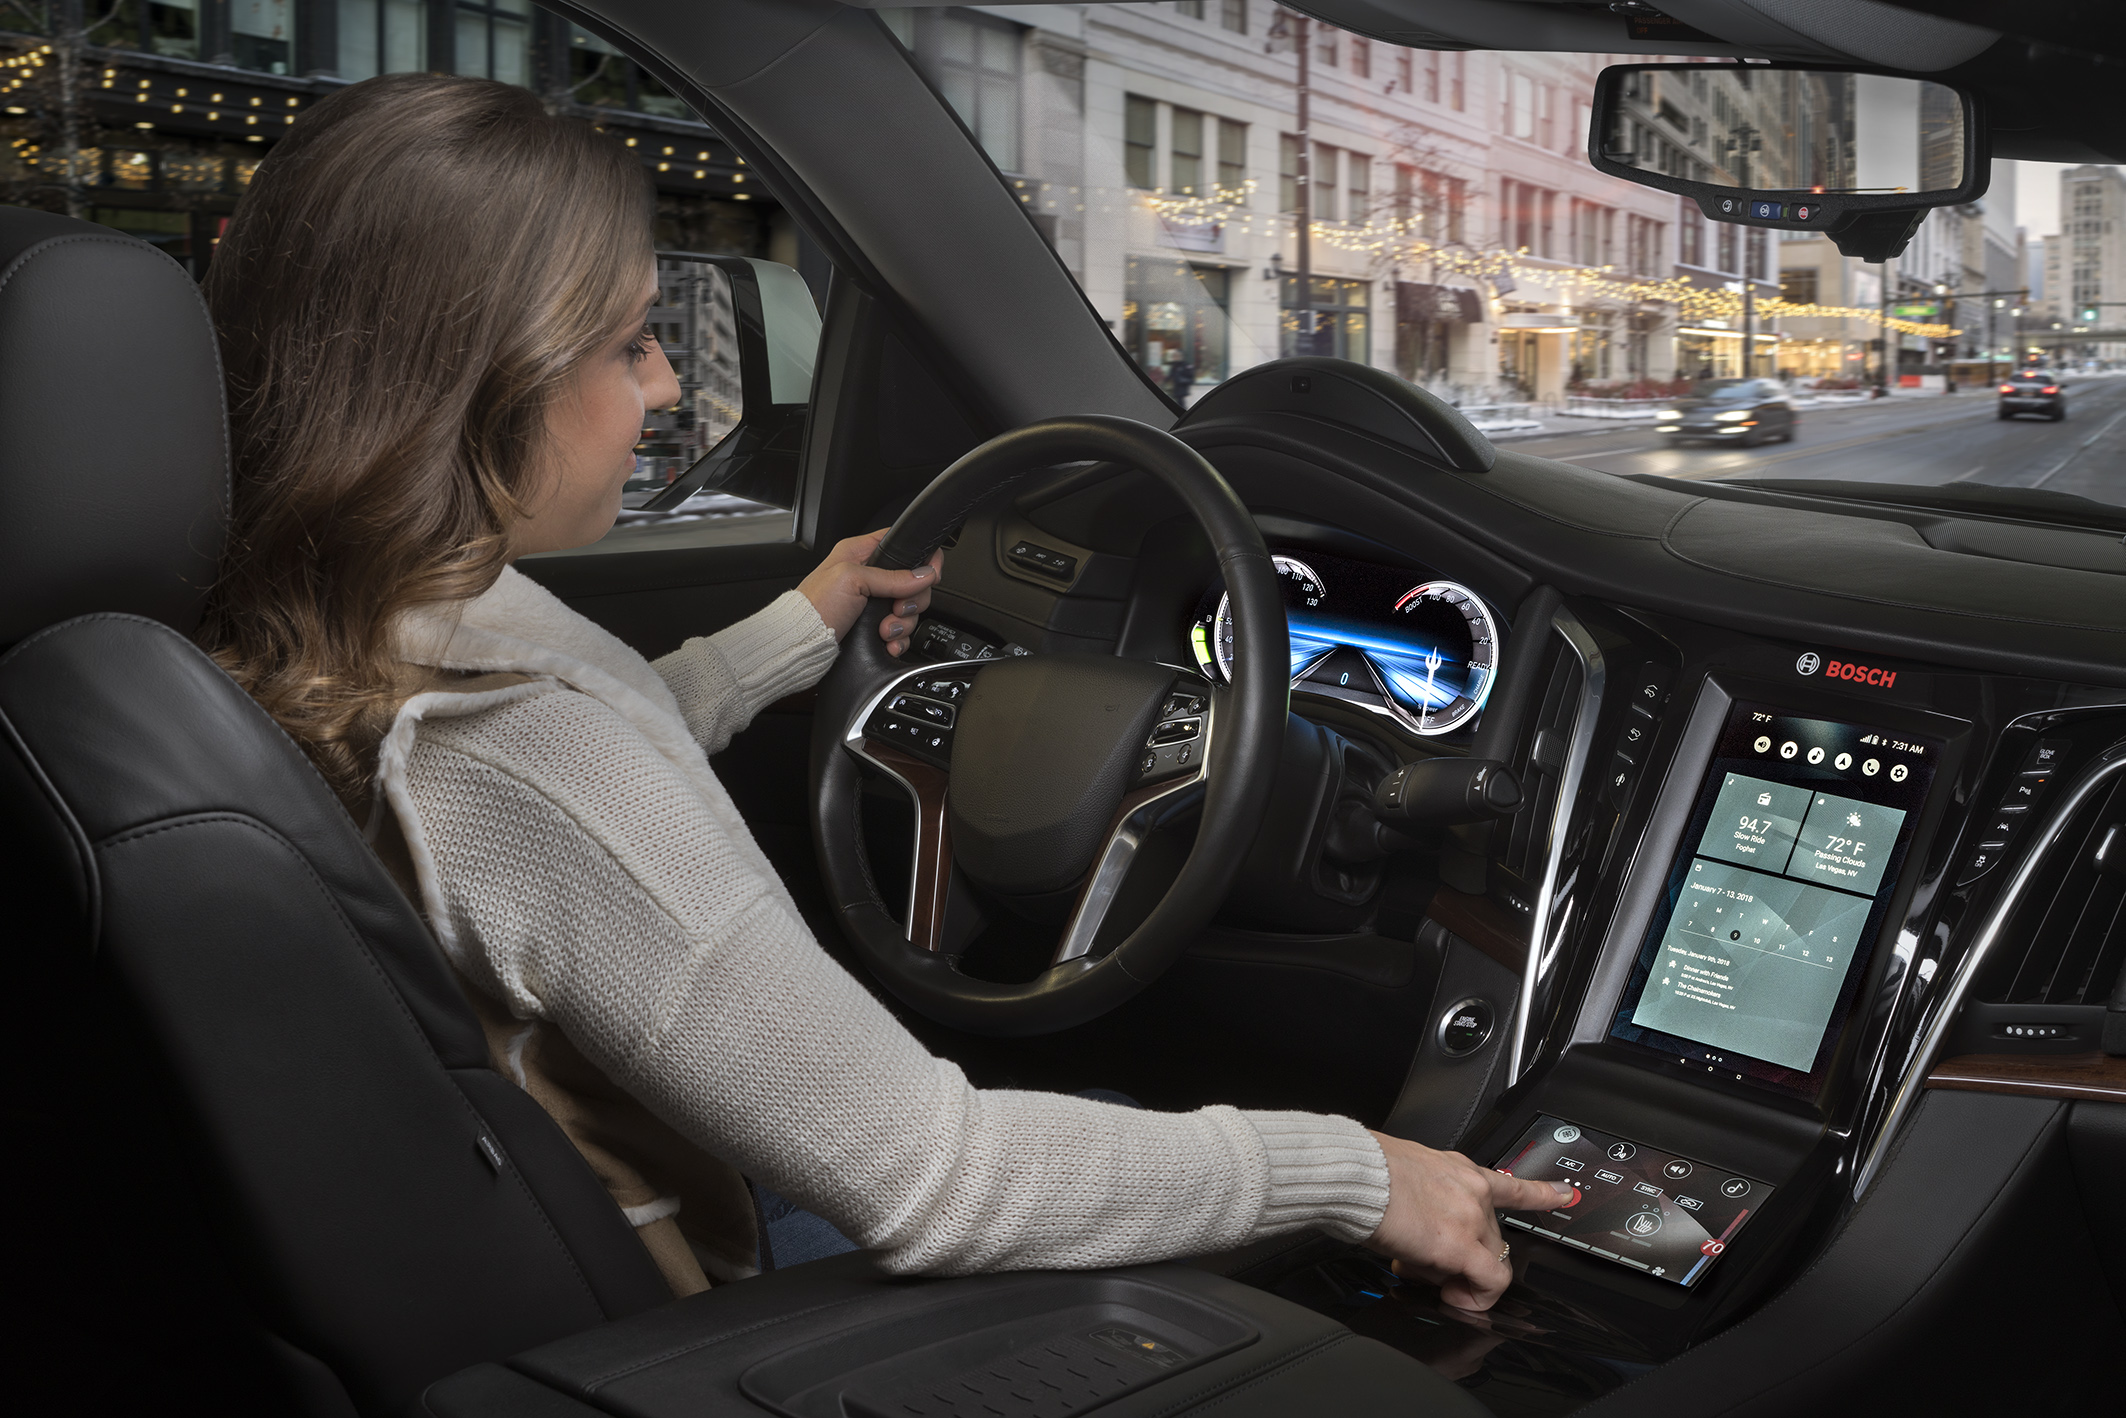 Digital displays and voice-controlled assistants are revolutionizing driving